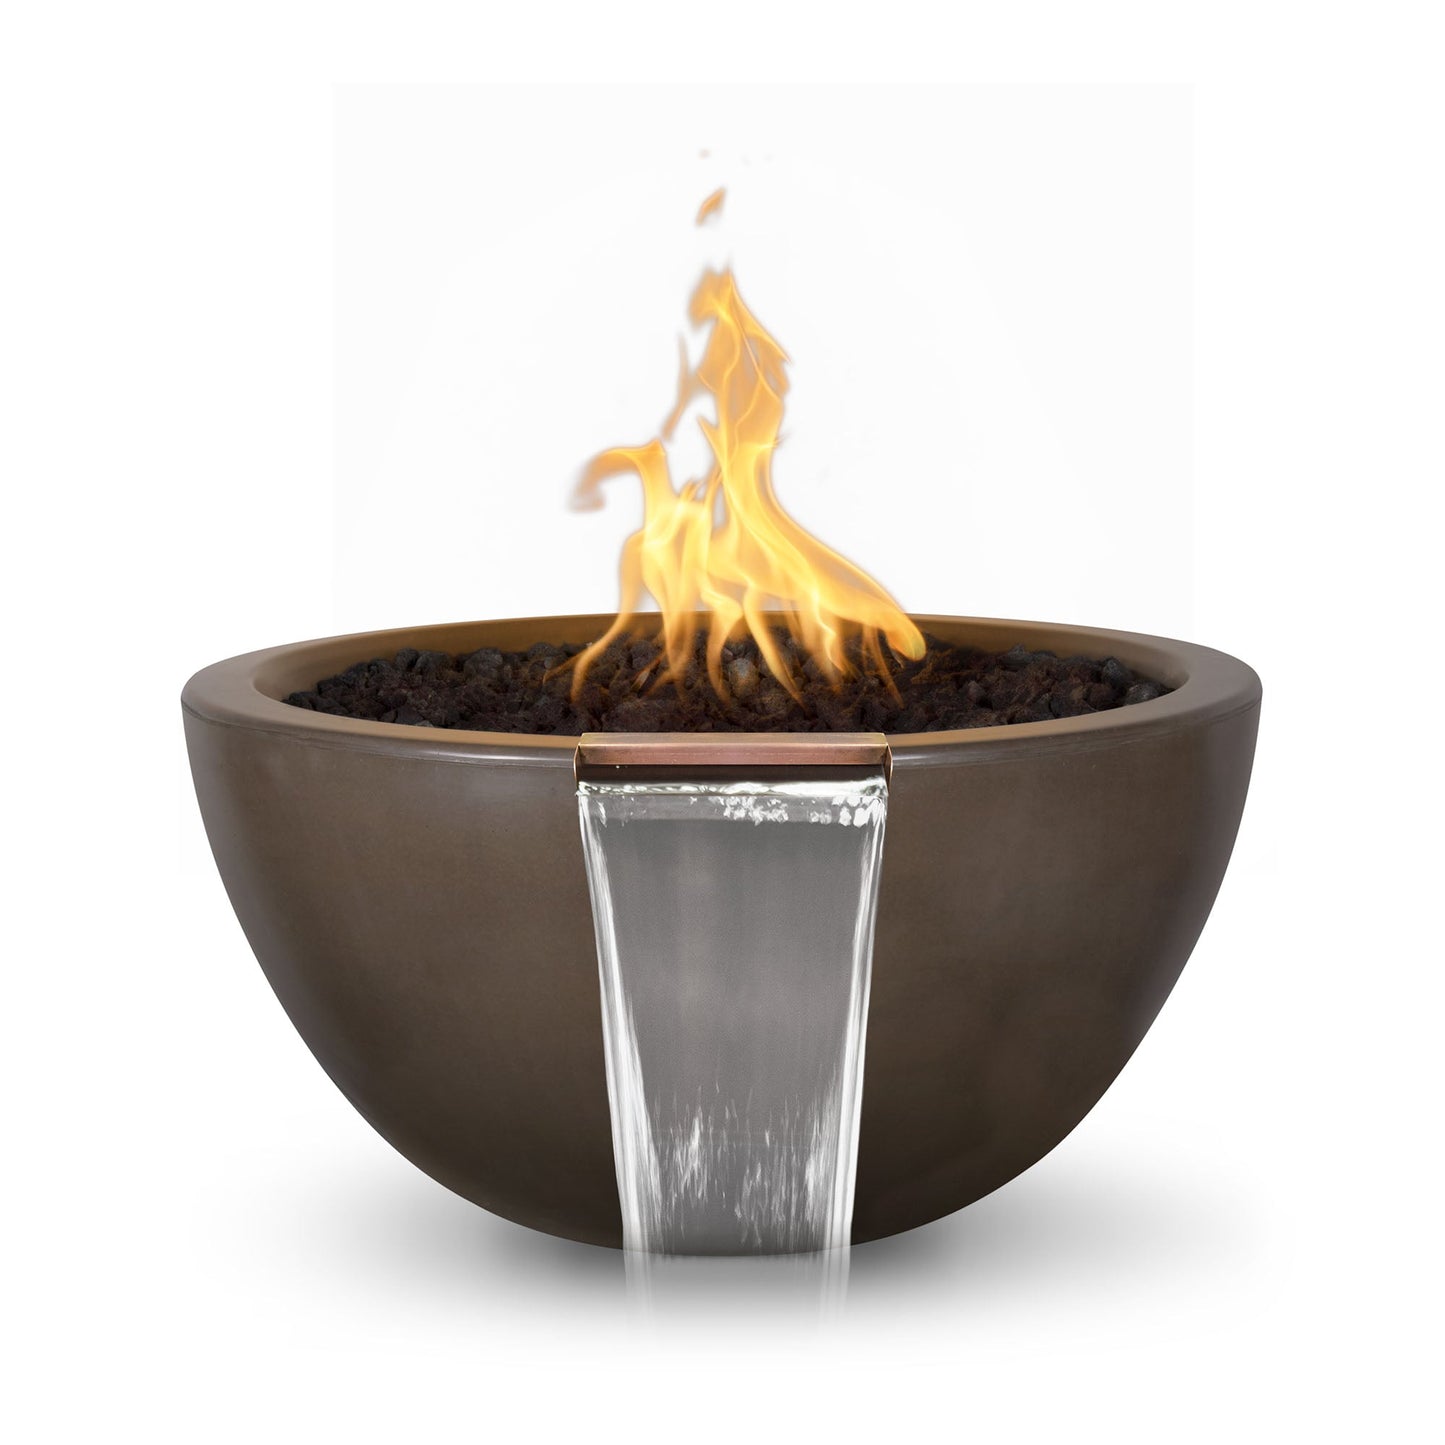 The Outdoor Plus Round Luna 30" Rustic Coffee GFRC Concrete Natural Gas Fire & Water Bowl with Match Lit with Flame Sense Ignition